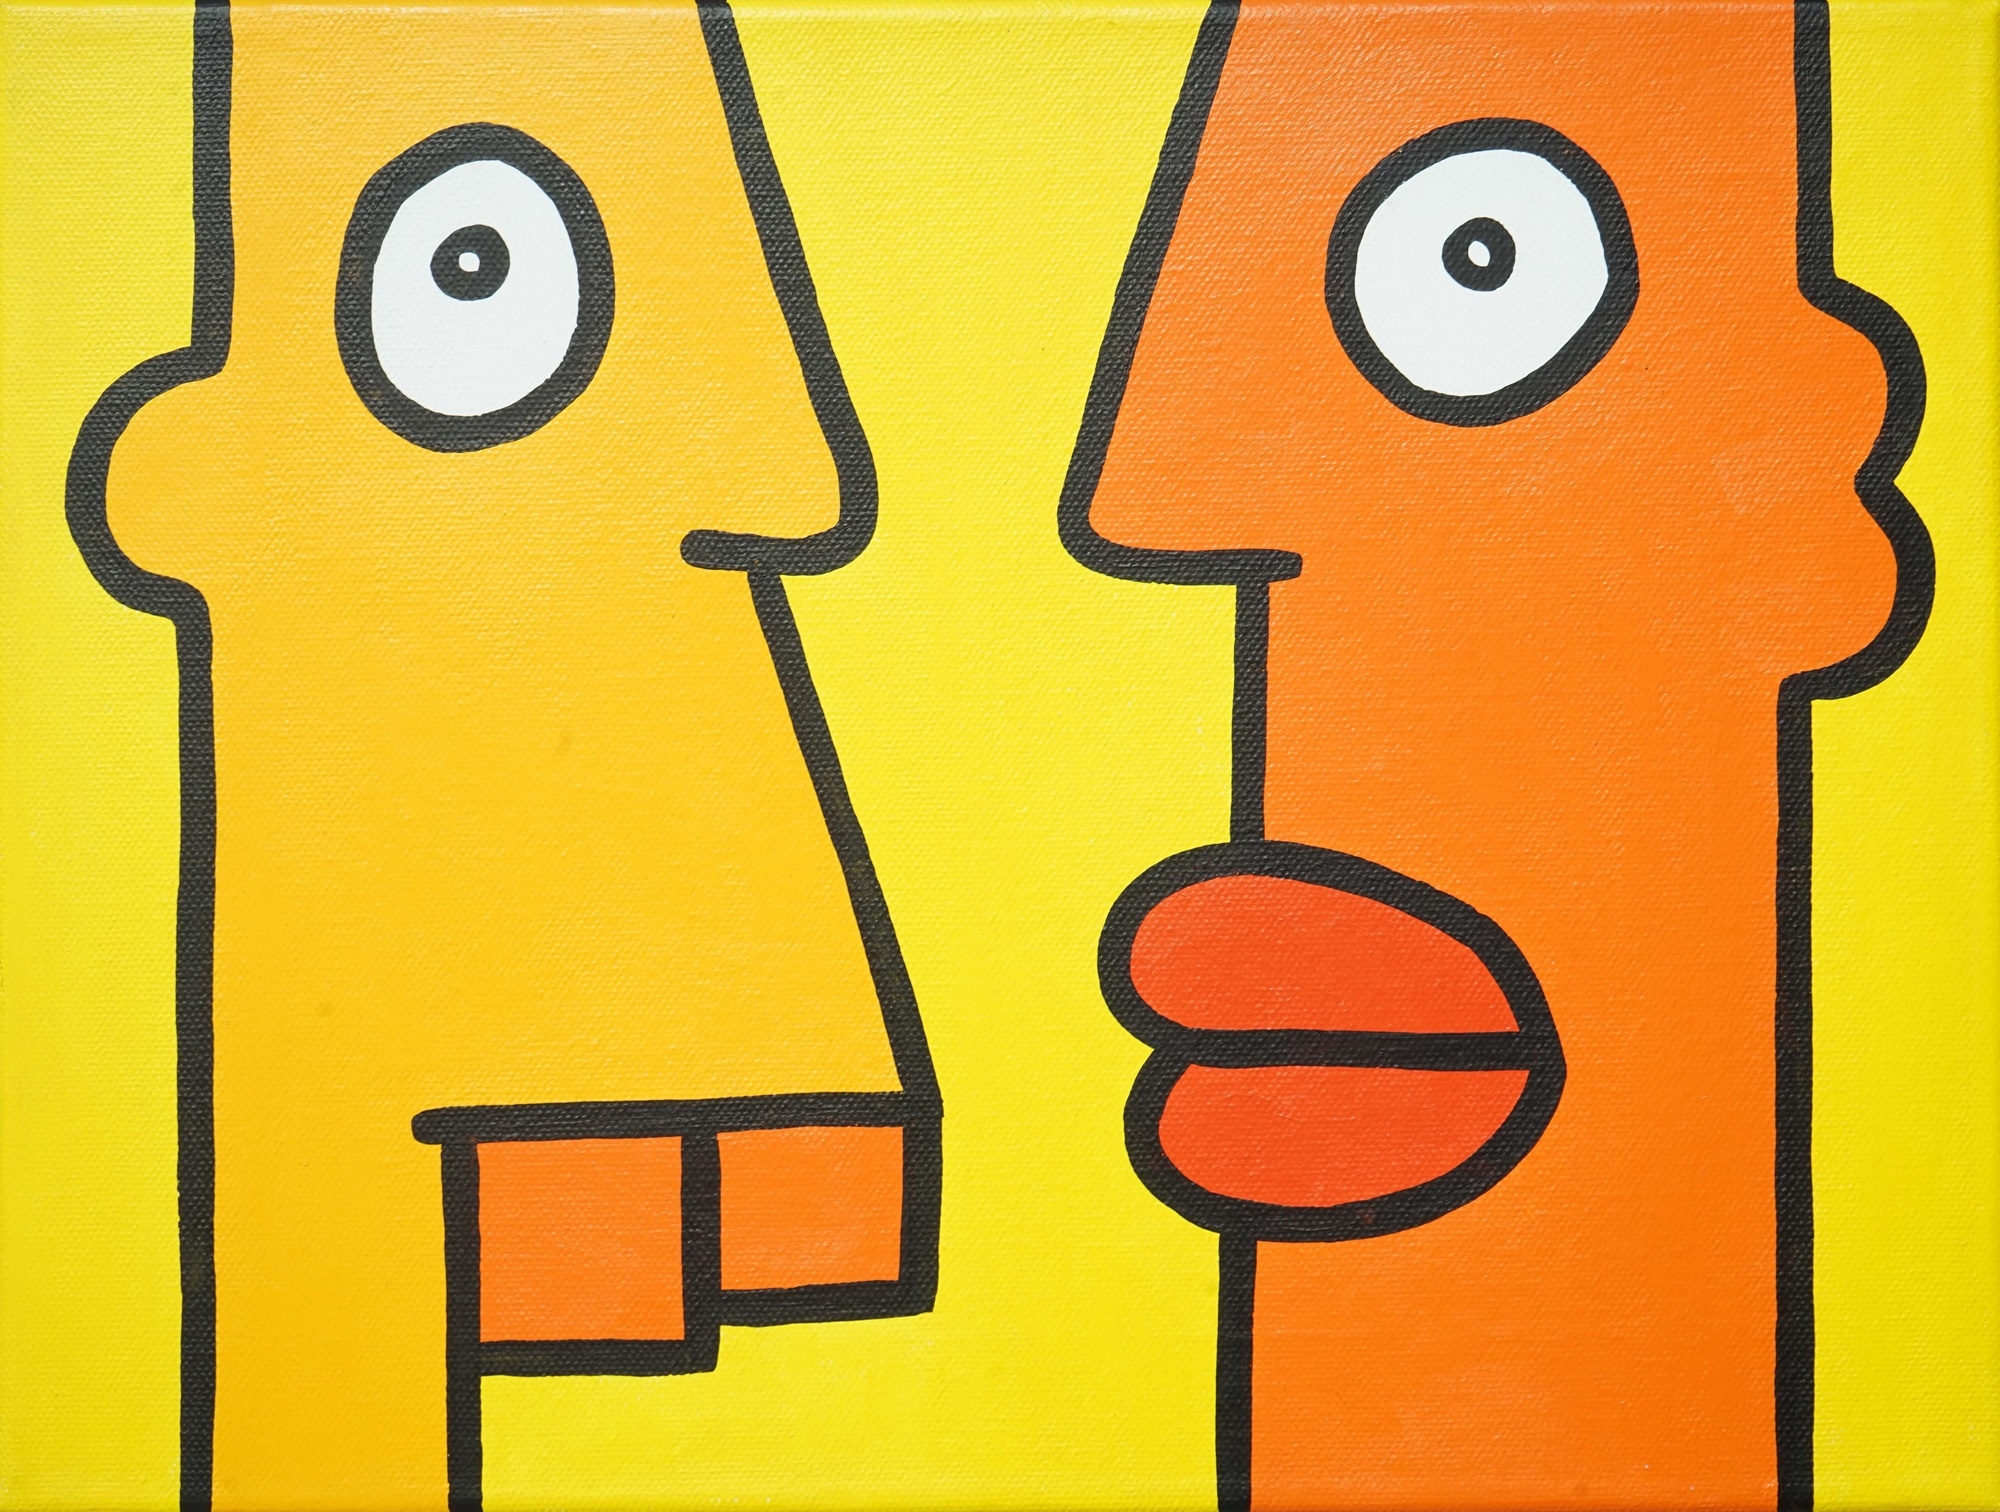 Let by Thierry Noir, 2013